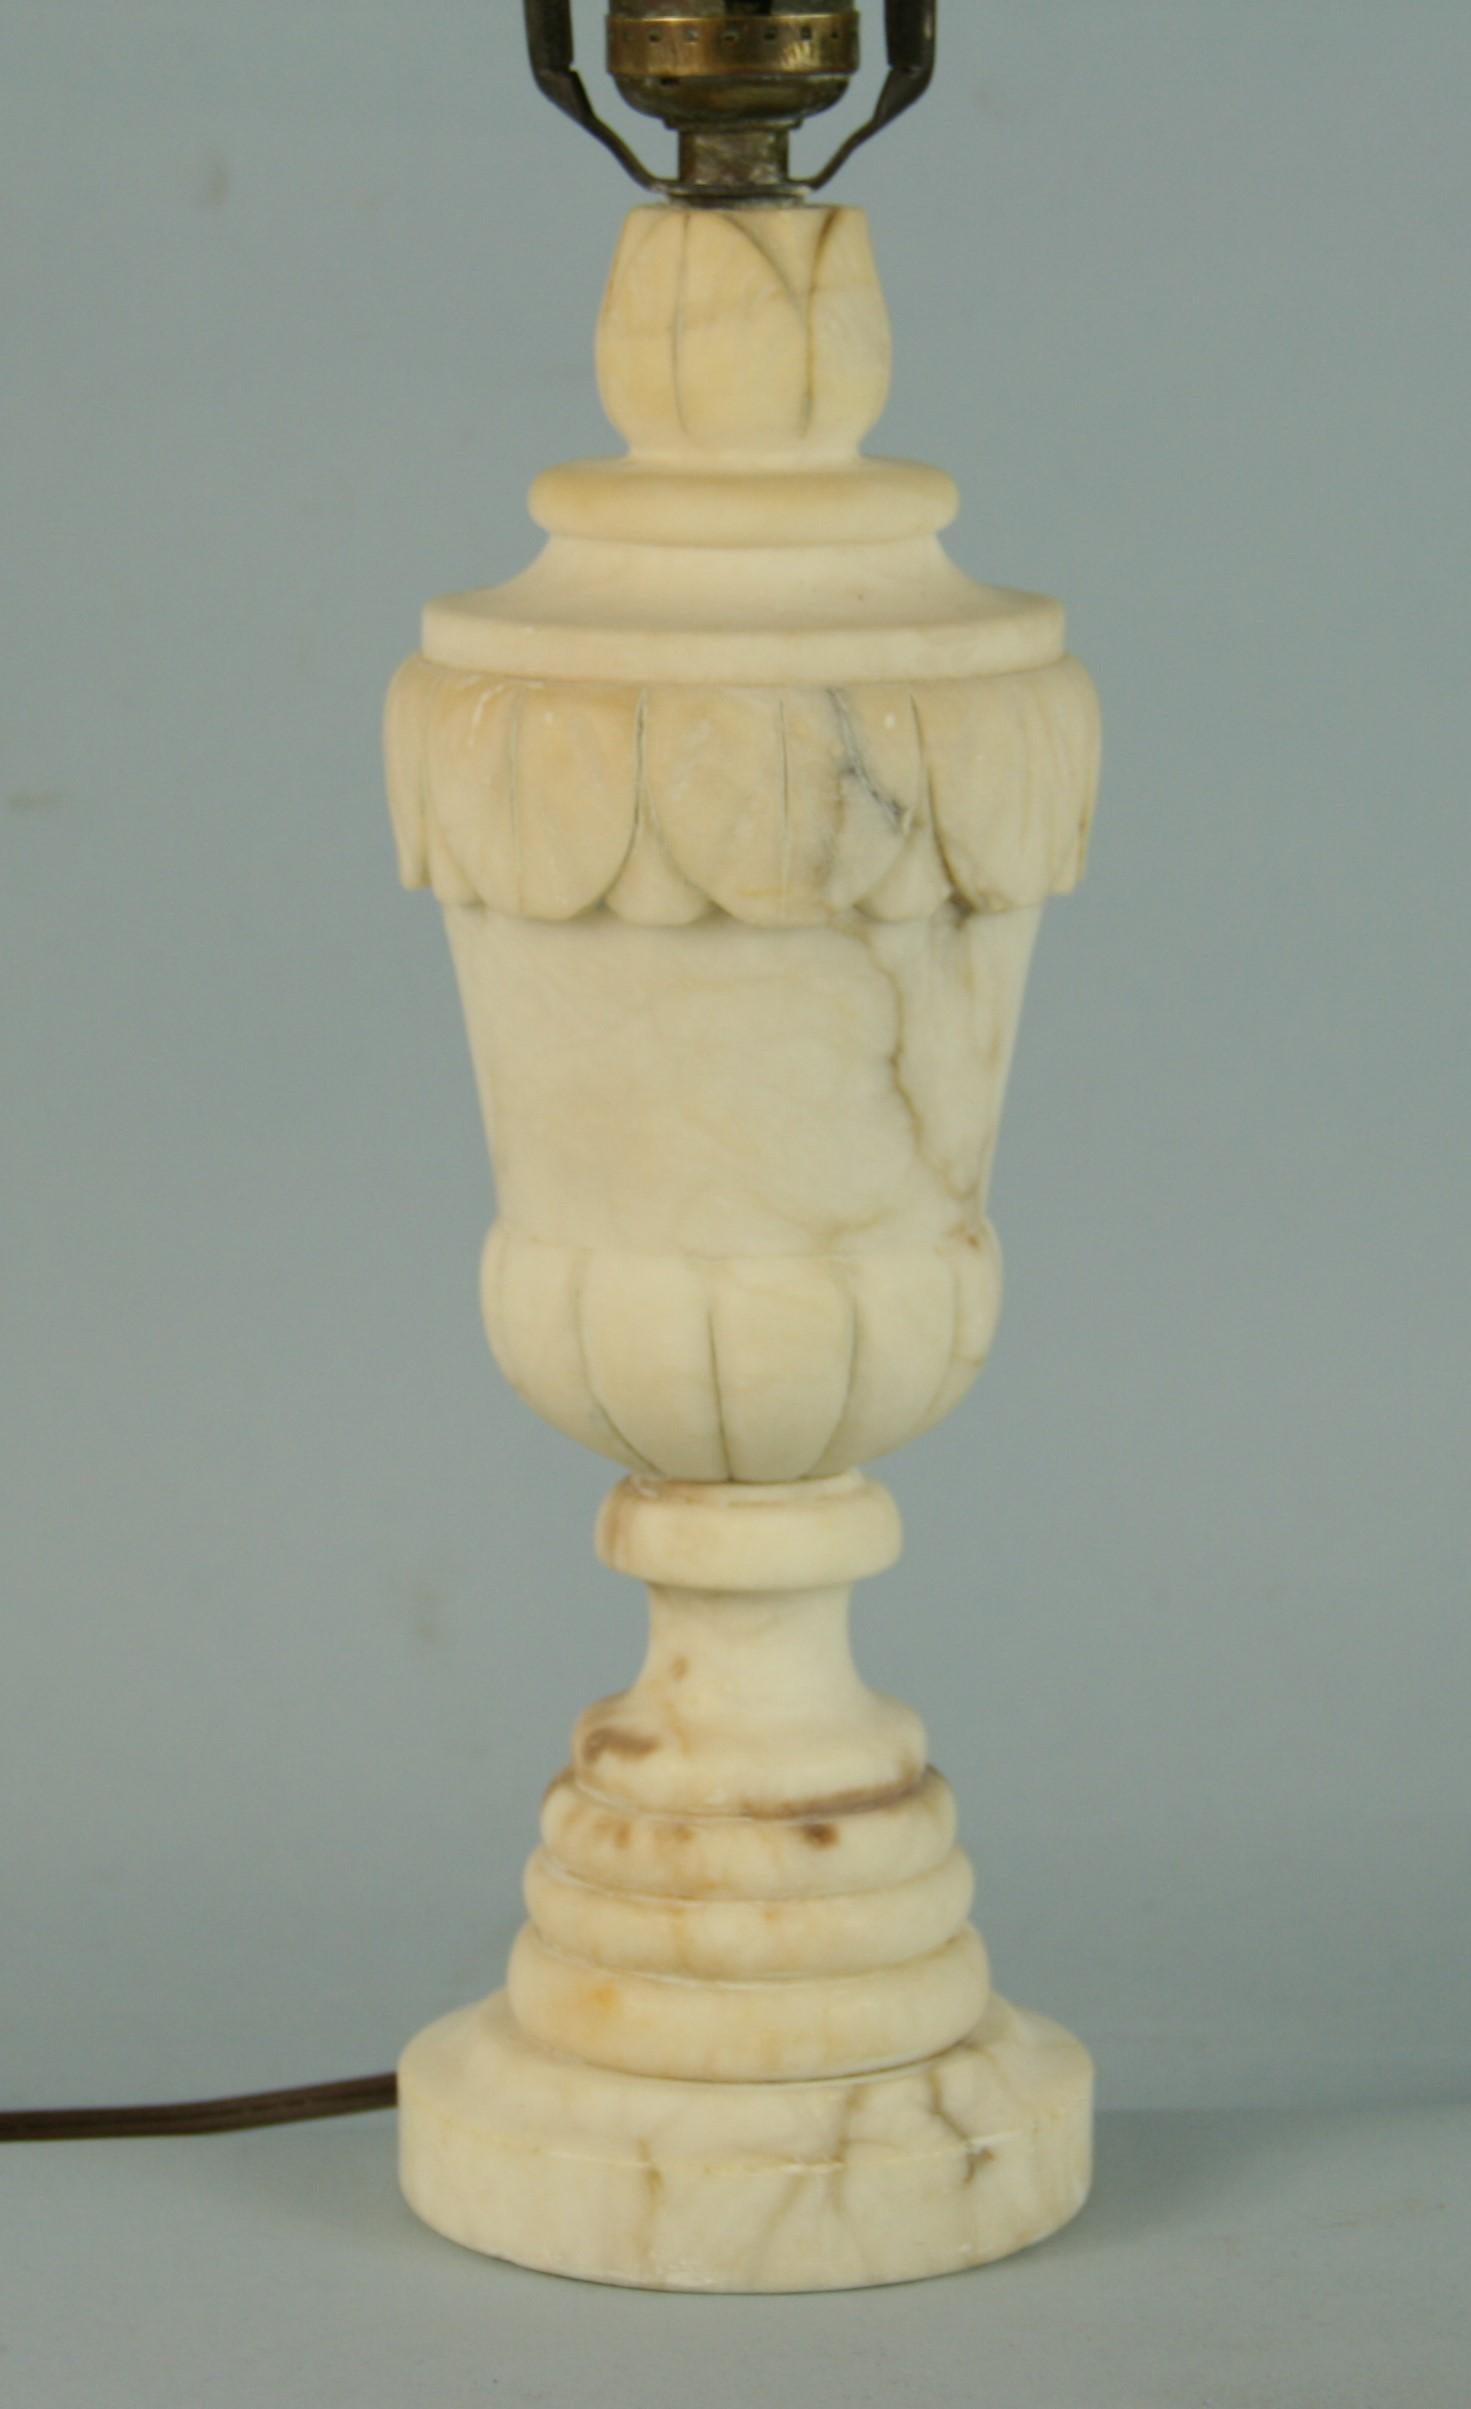 3-643 carved alabaster lamp
Original wiring in working condition
12